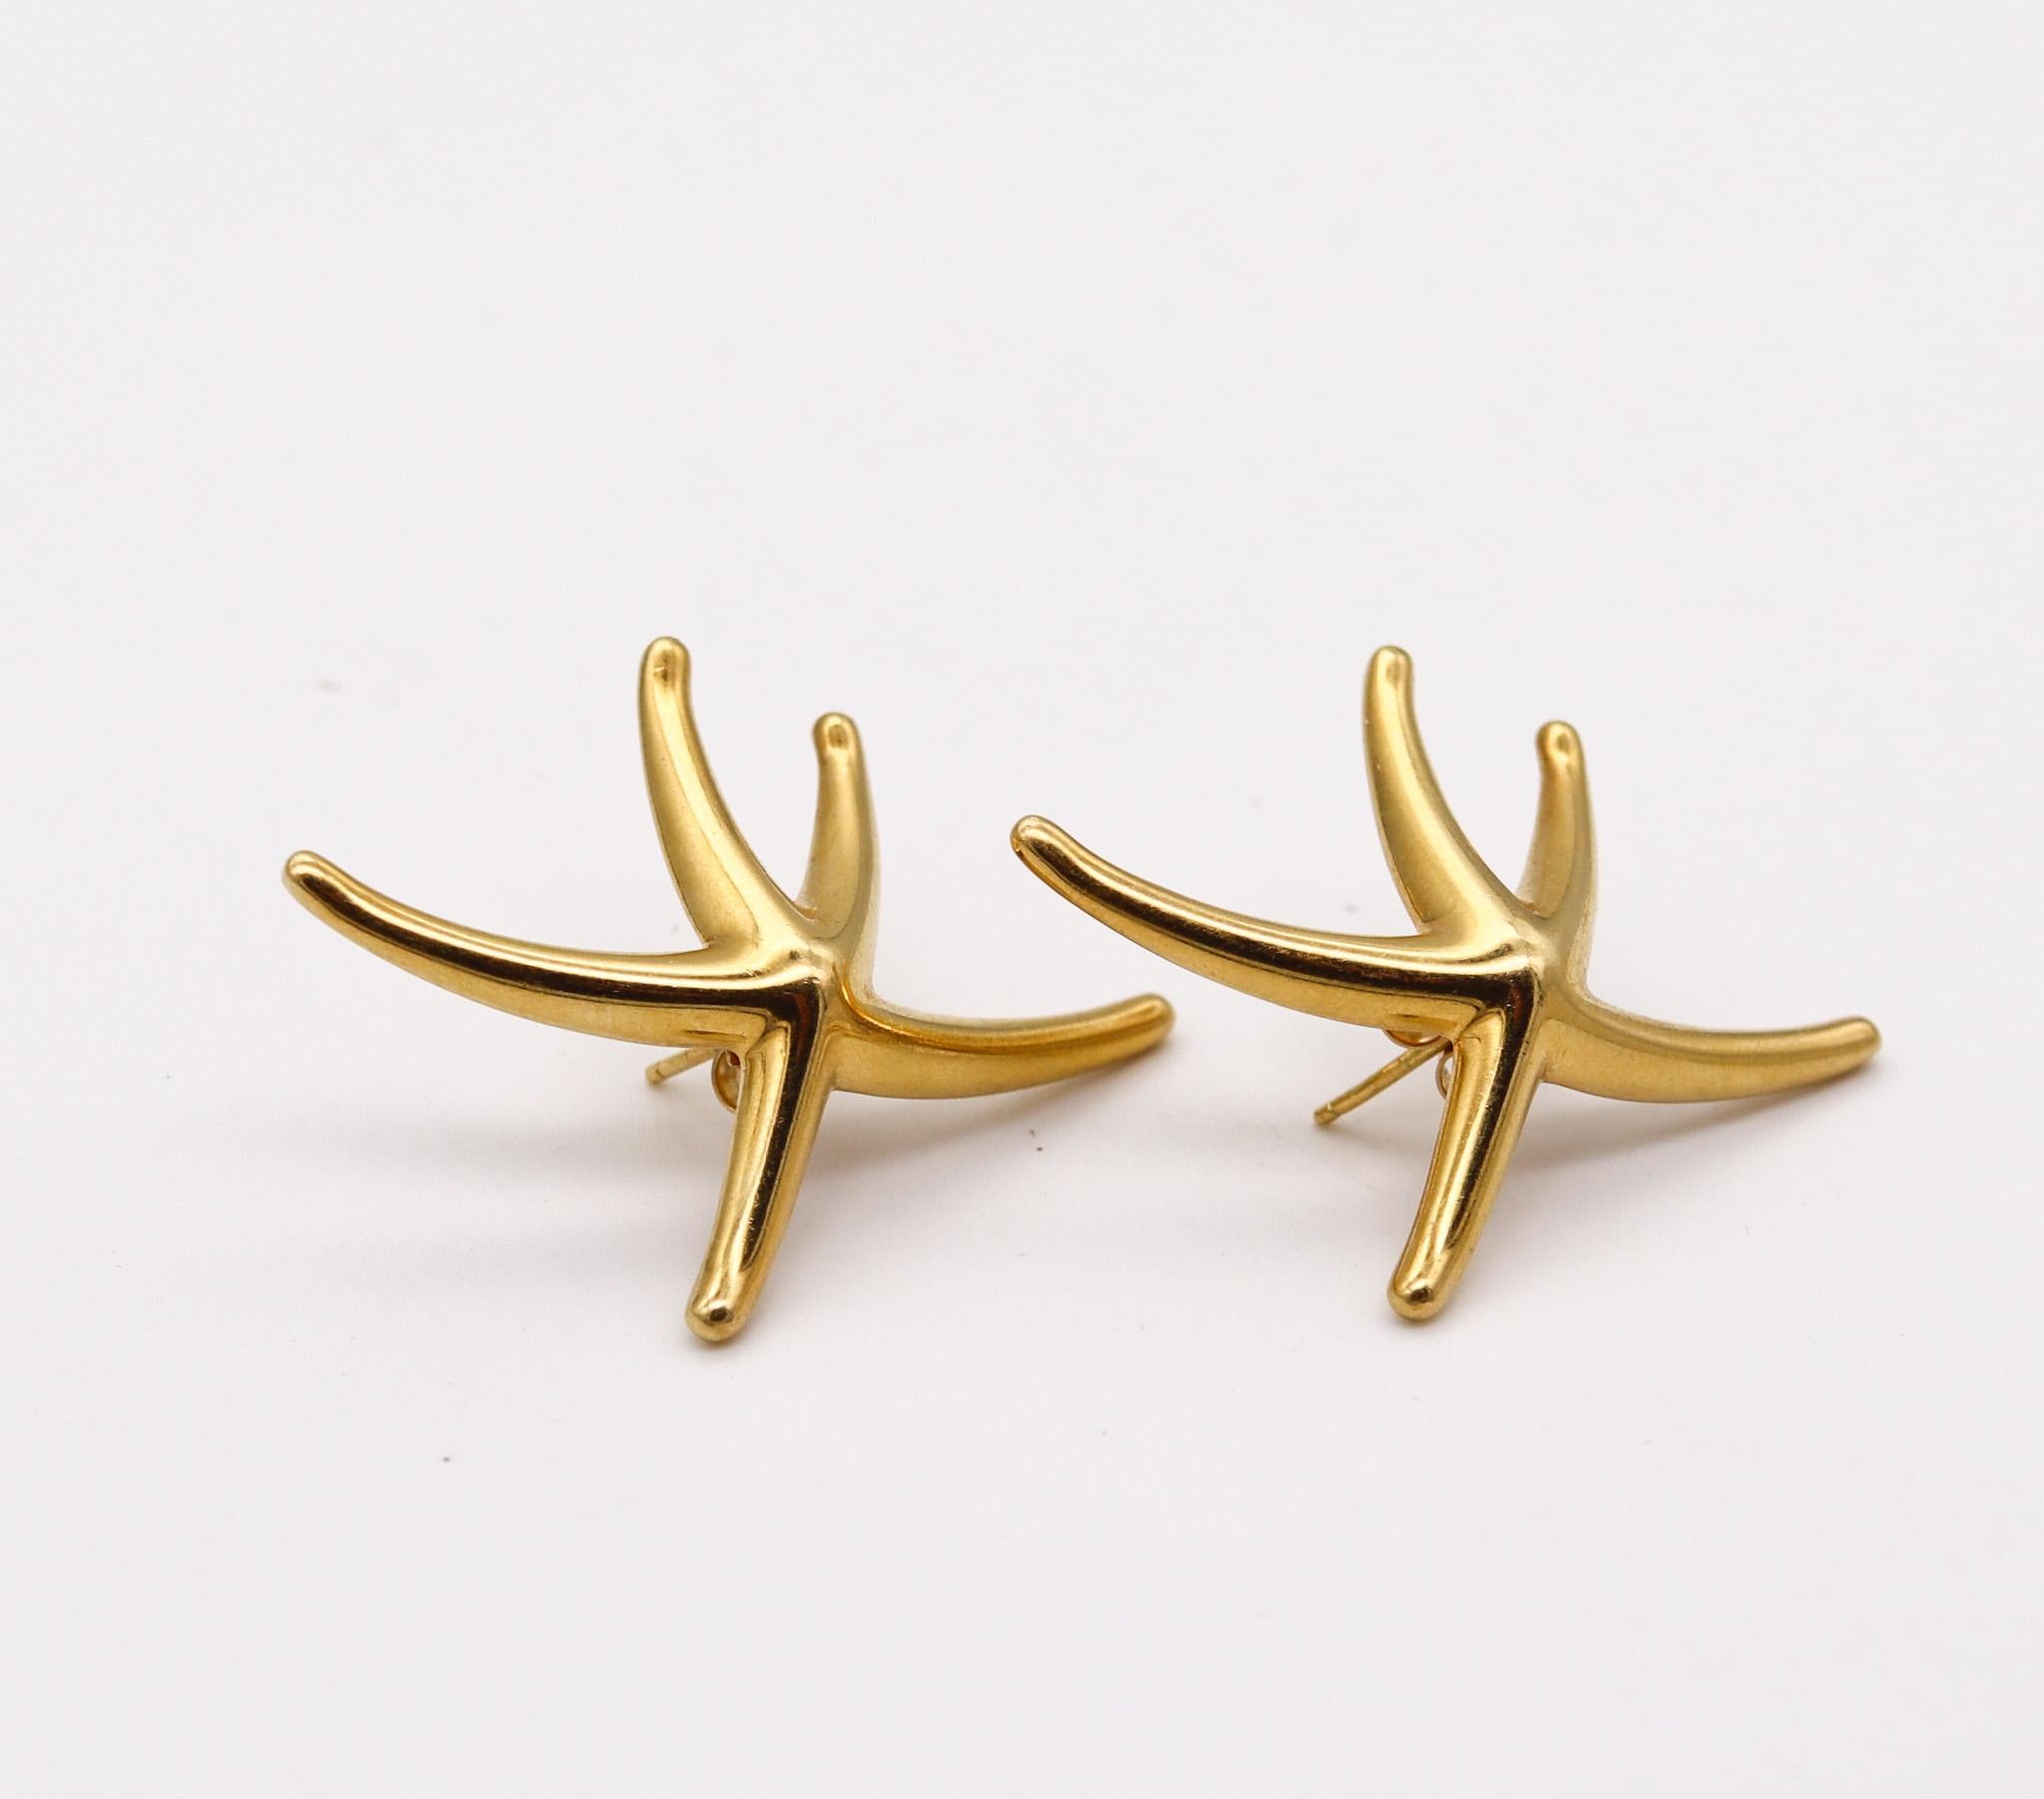 Tiffany Co. 1980 New York by Elsa Peretti Starfish Earrings in 18kt Yellow Gold 2